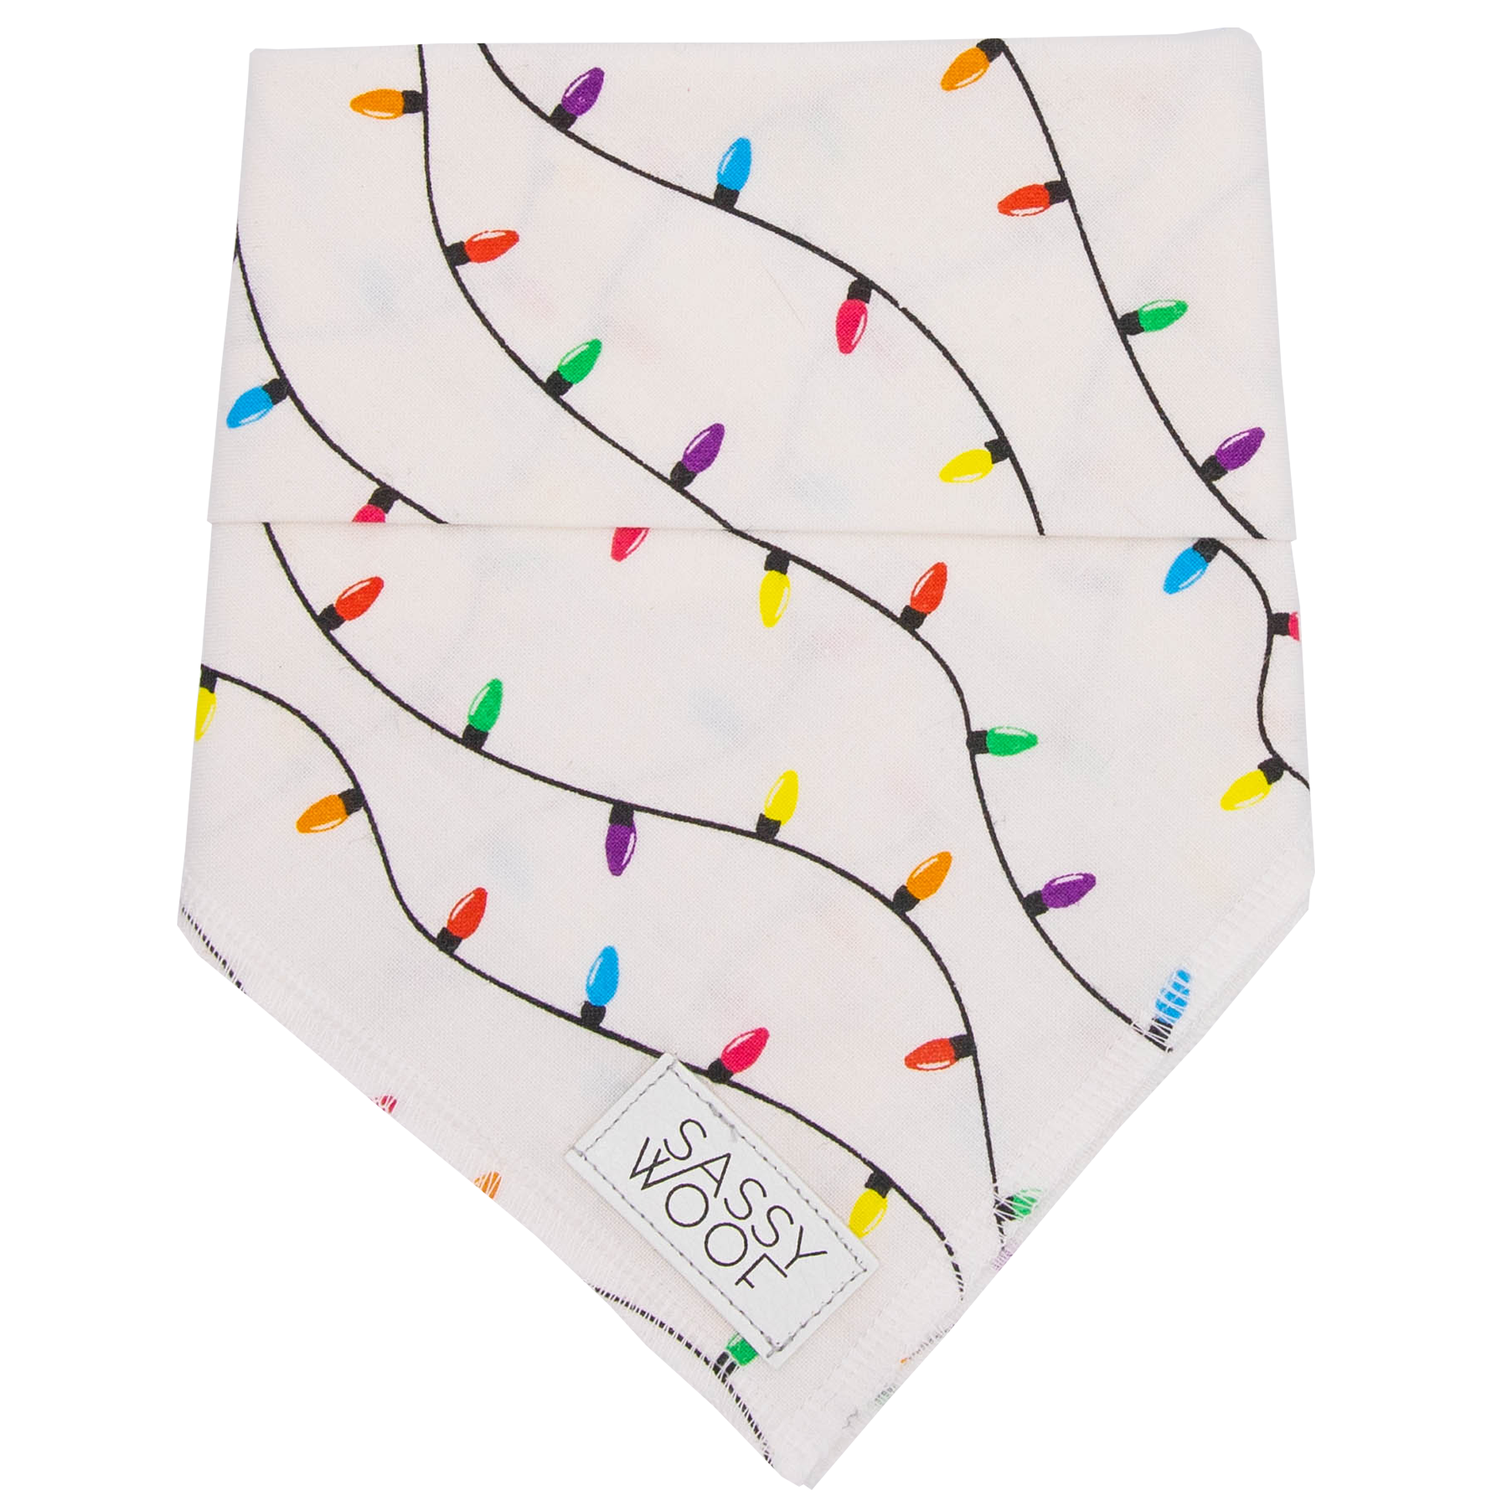 Sassy Woof Dog Bandana in The Dapple's Black Friday Sales Round Up for Dog Lovers Including Dog Treats, Dog Toys, and Dog Beds on Sale